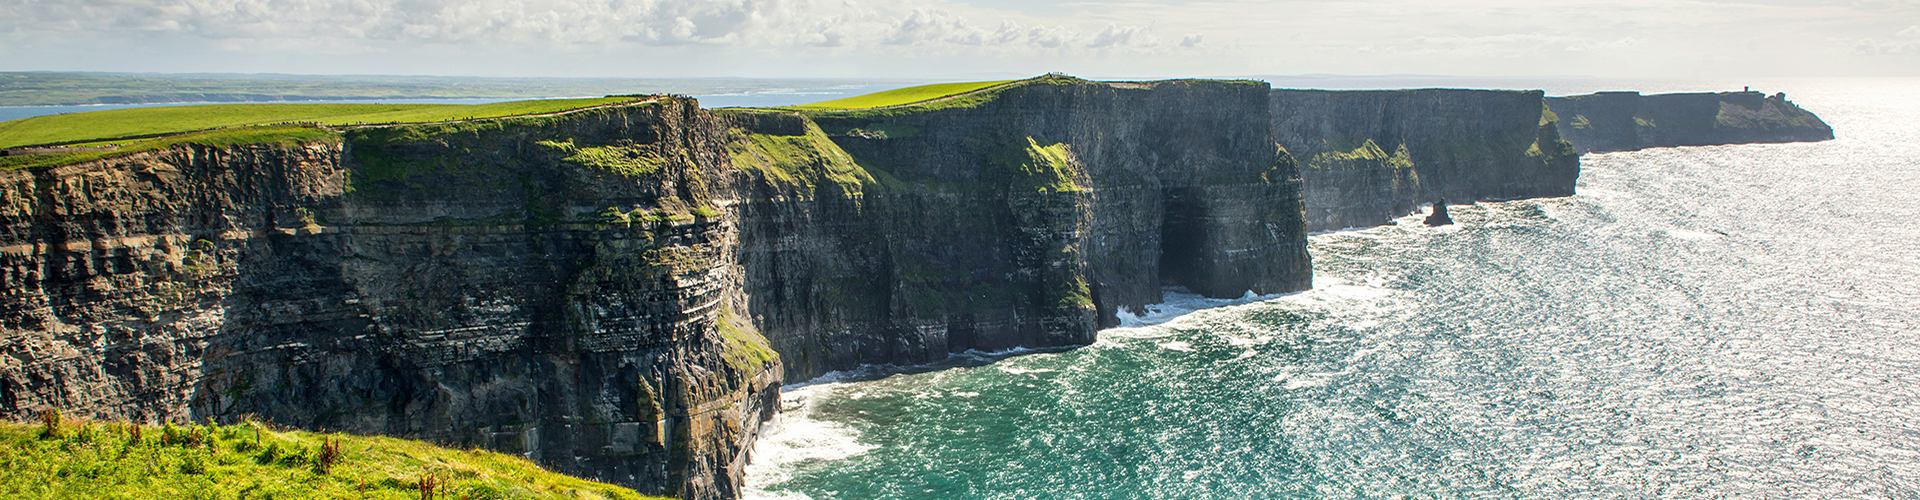 Mac Tours Ireland Home Page Cliffs of Moher